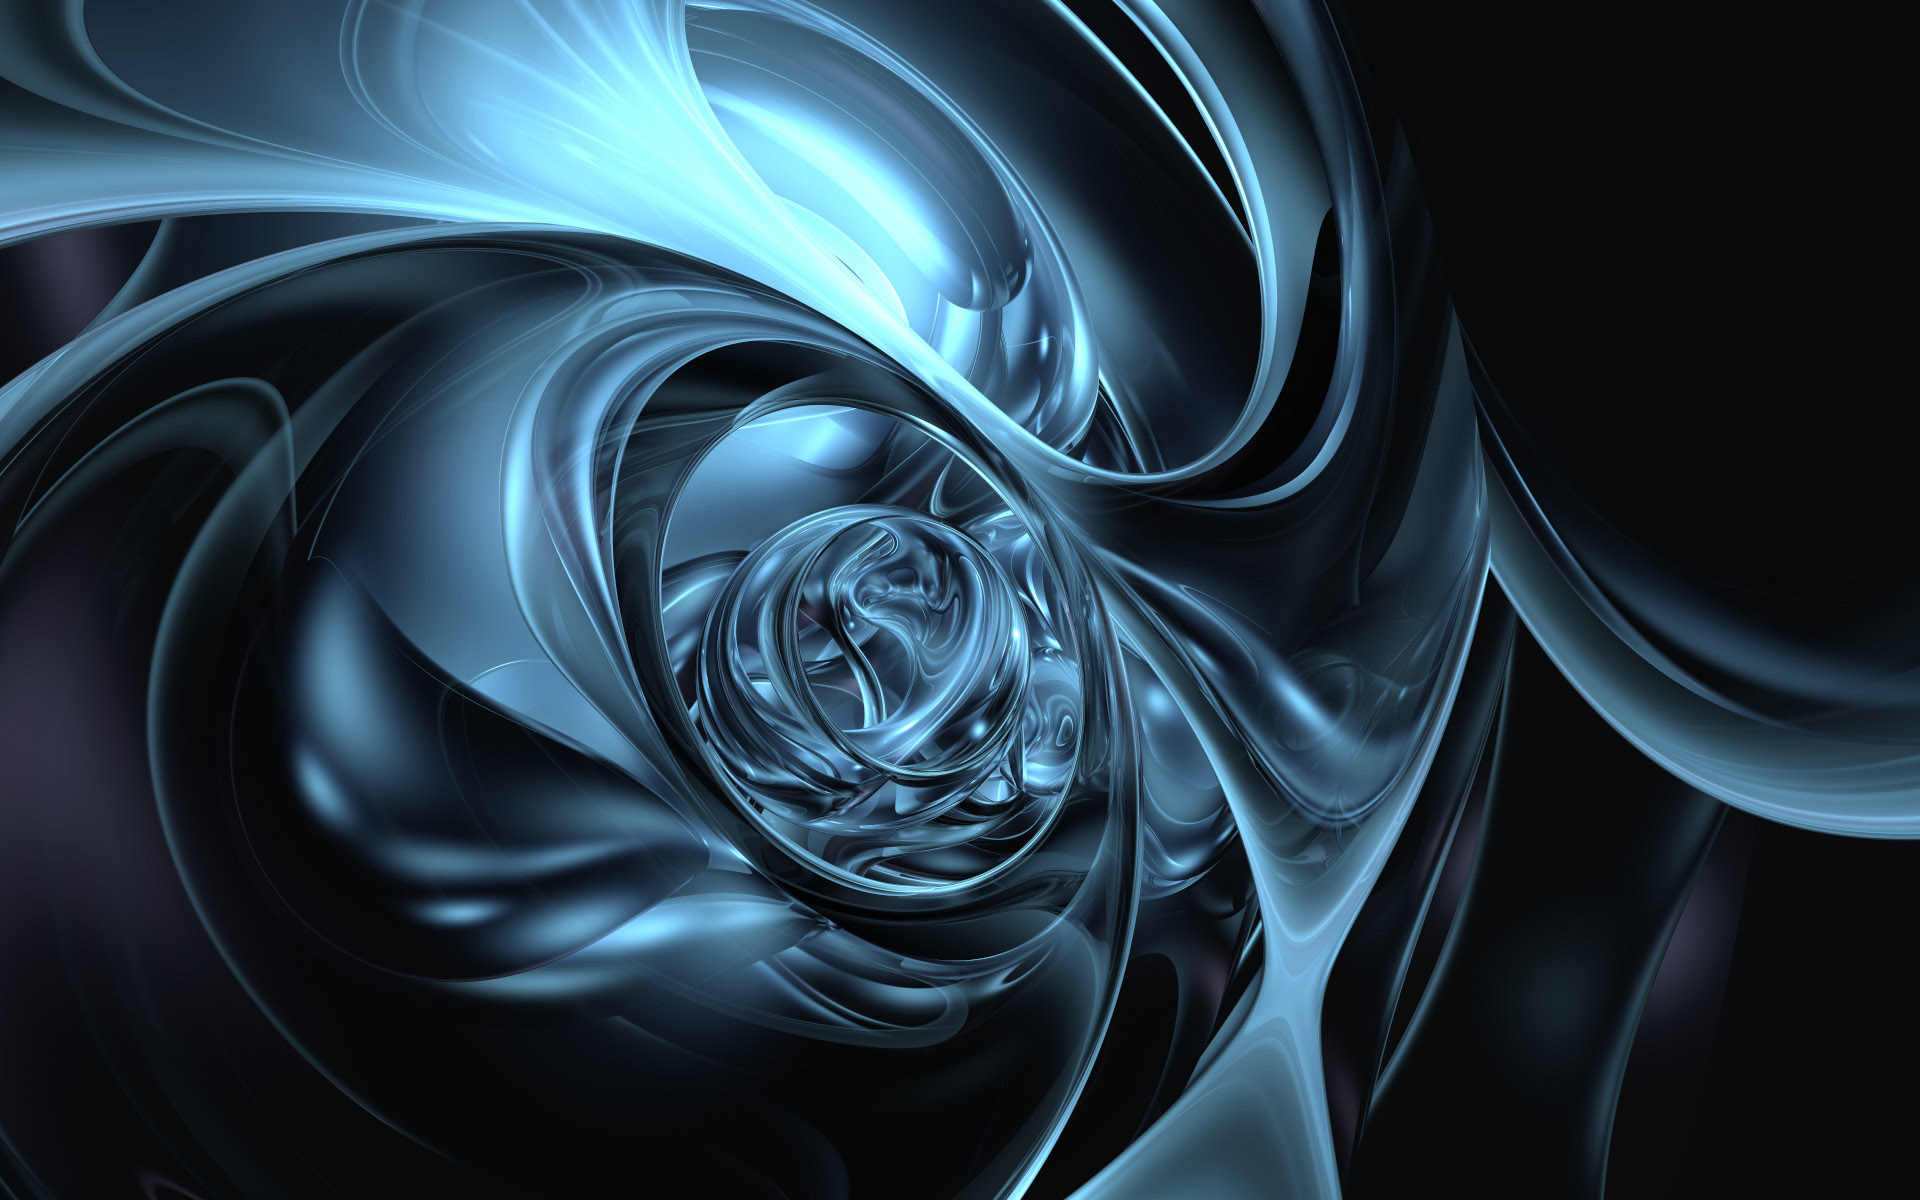 Desktop 3d Abstract Mobile Laptop Wallpapers Free Download